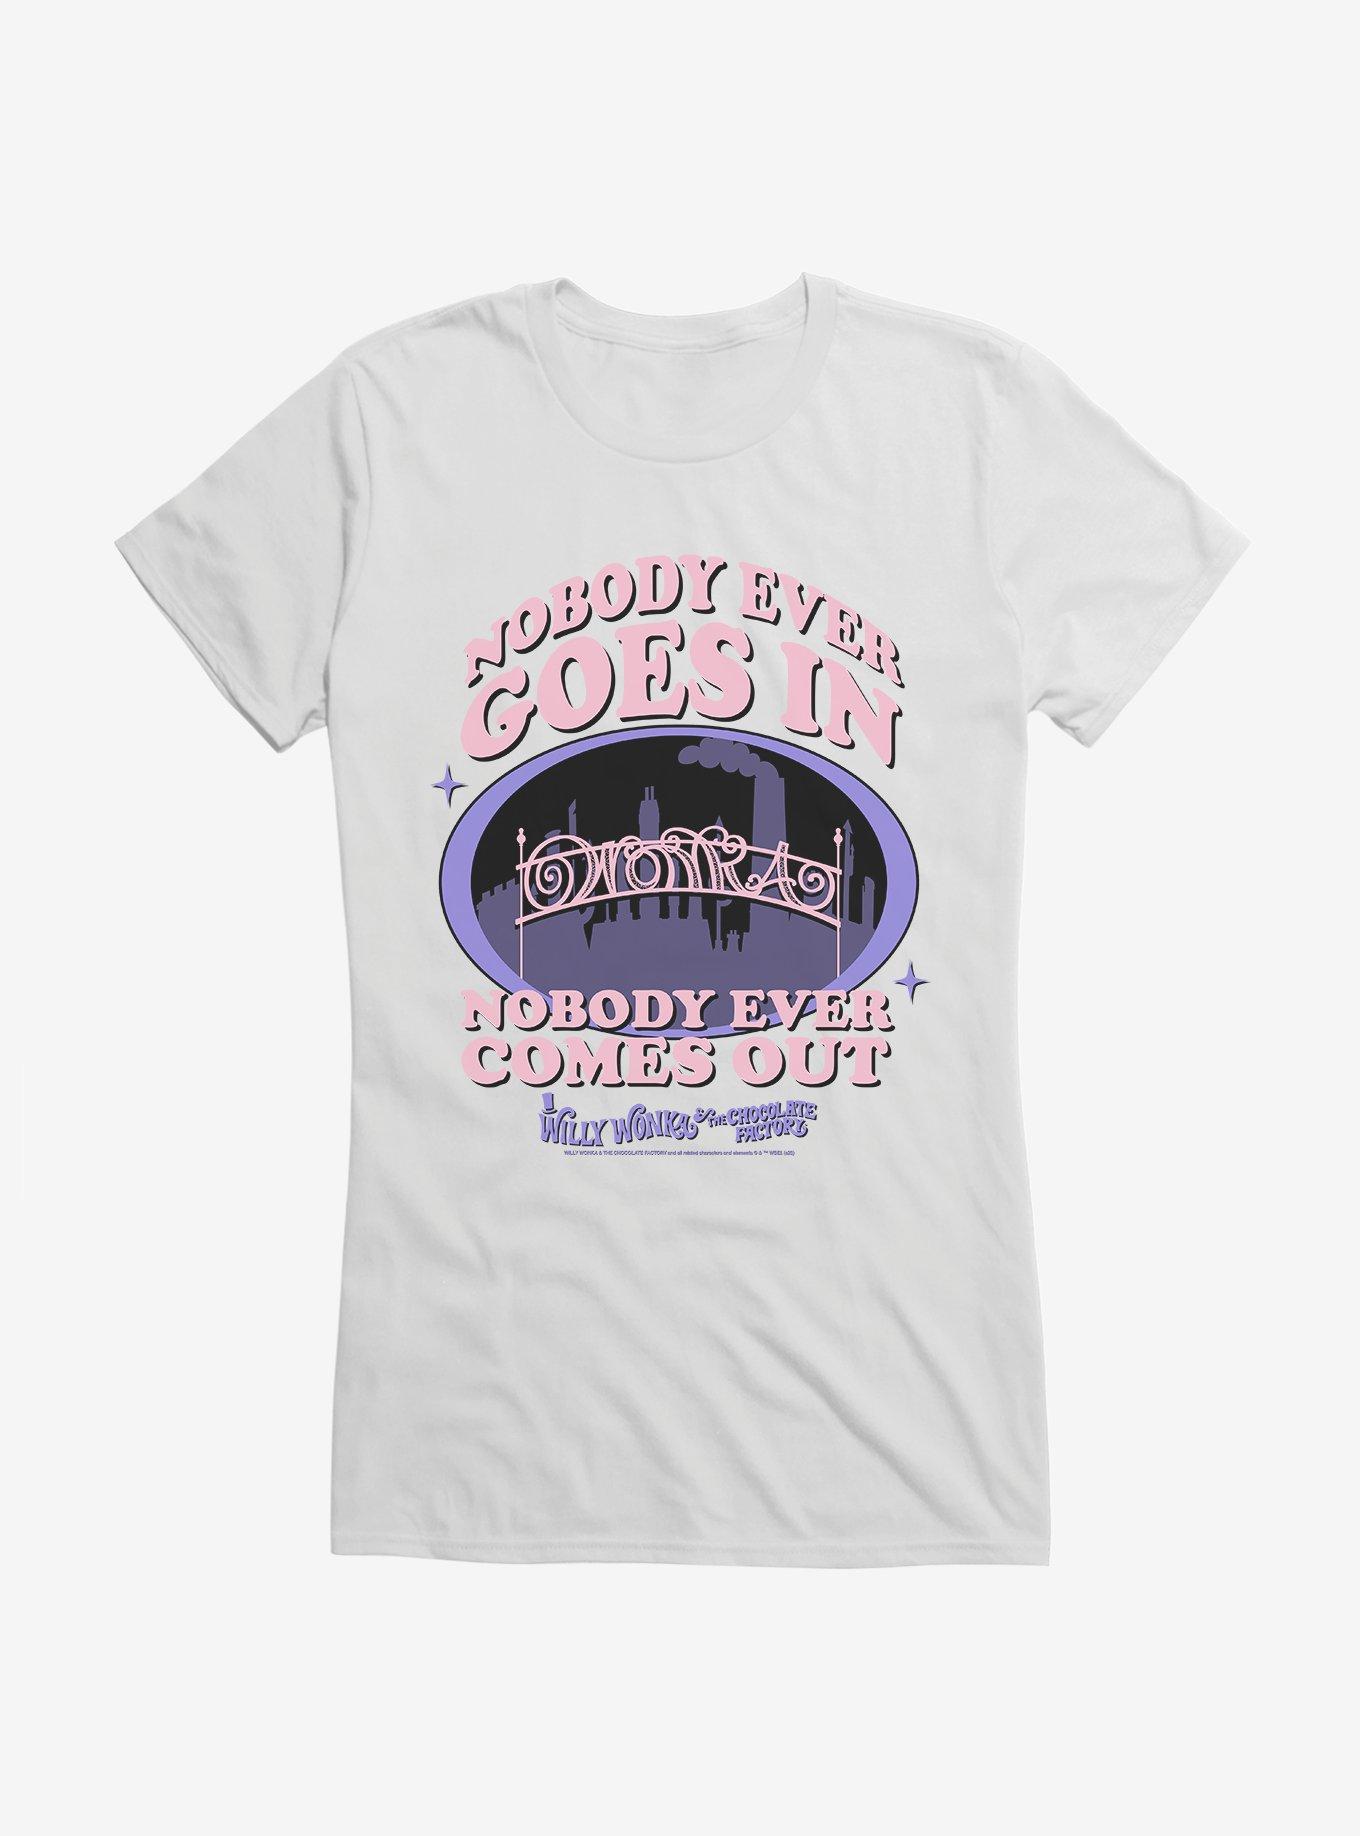 Willy Wonka And The Chocolate Factory Girls T-Shirt